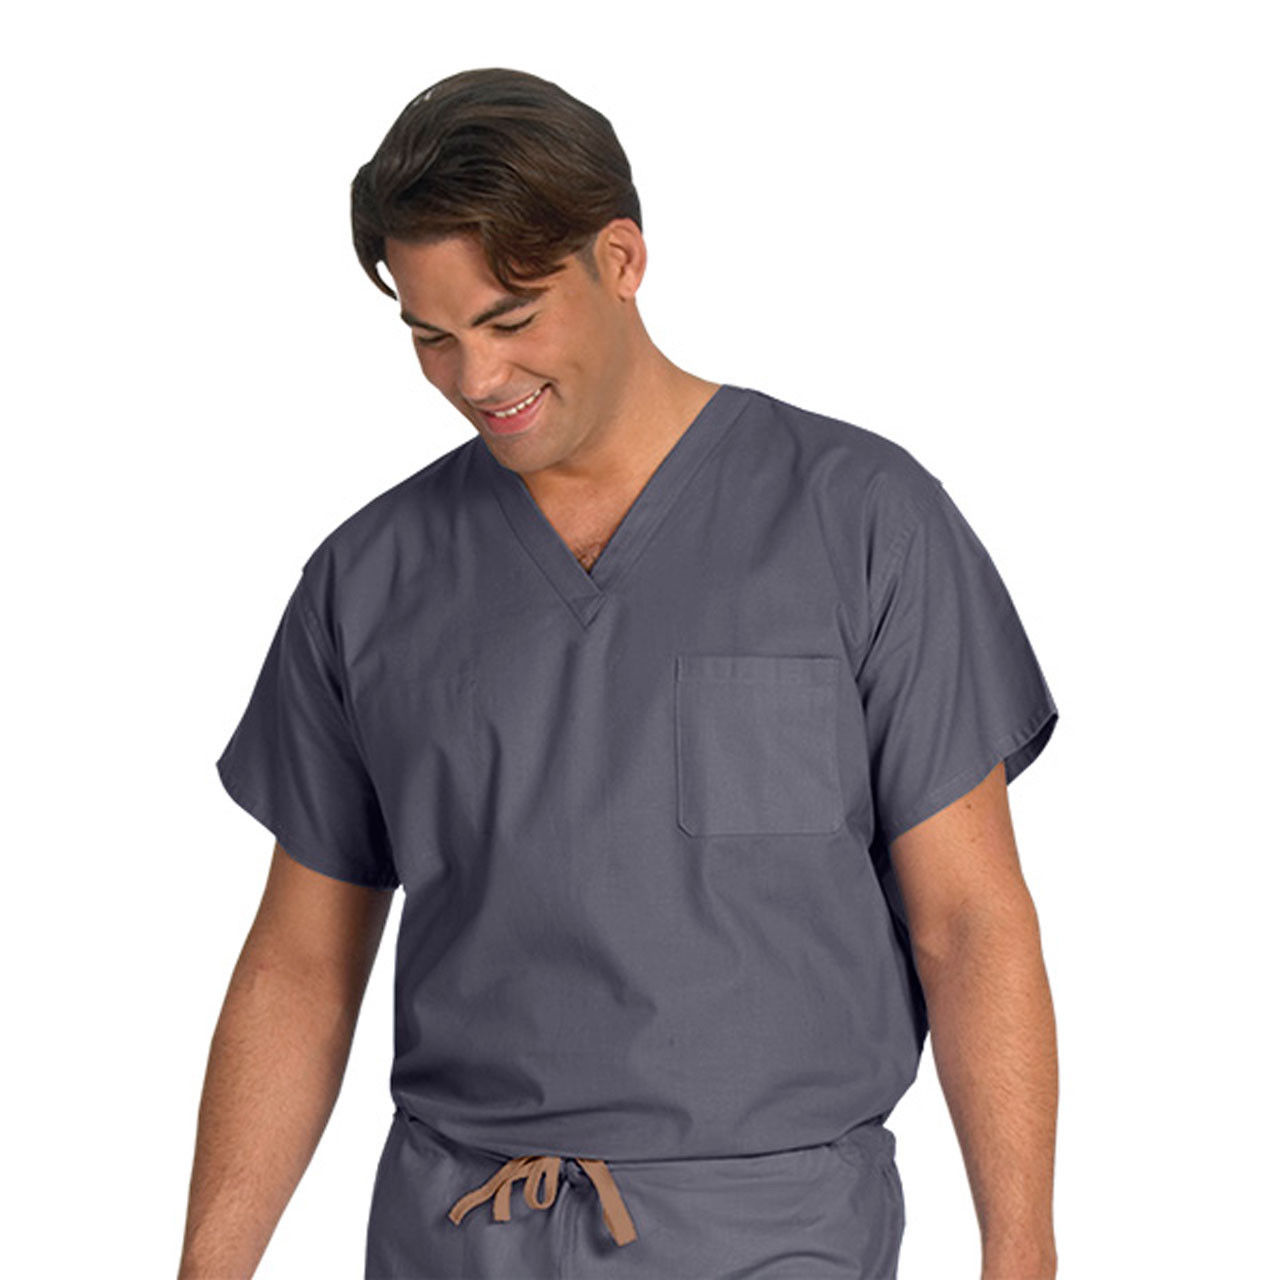 Is the dark gray scrubs set unisex and reversible?